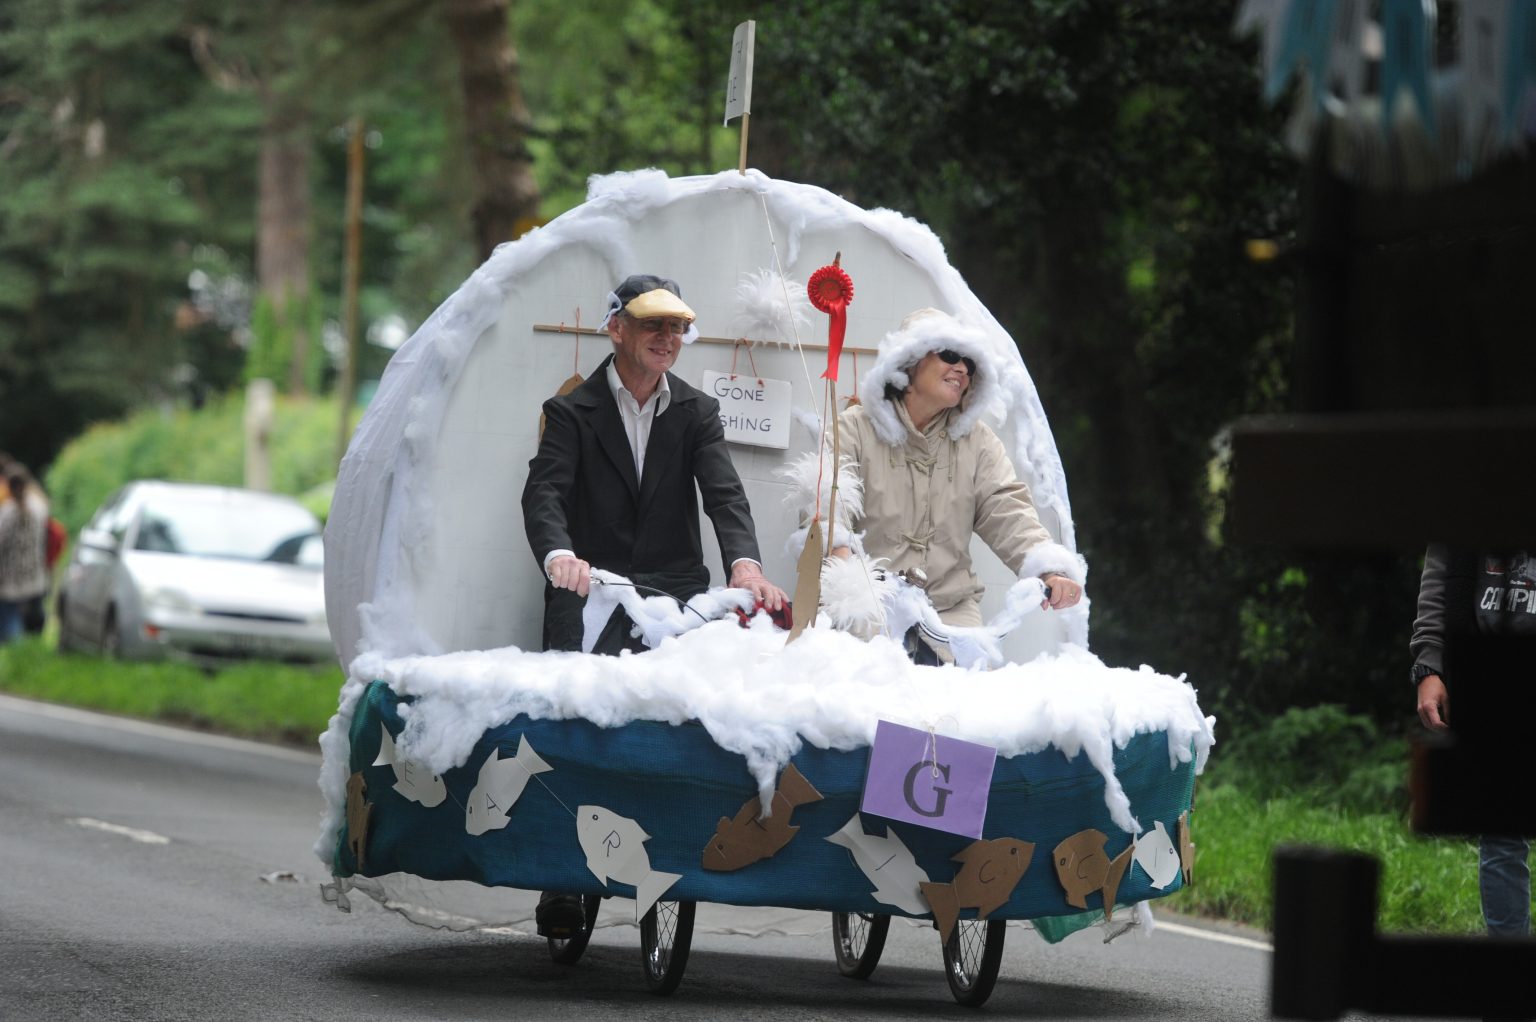 A cycle entry in the Copythorne Carnival